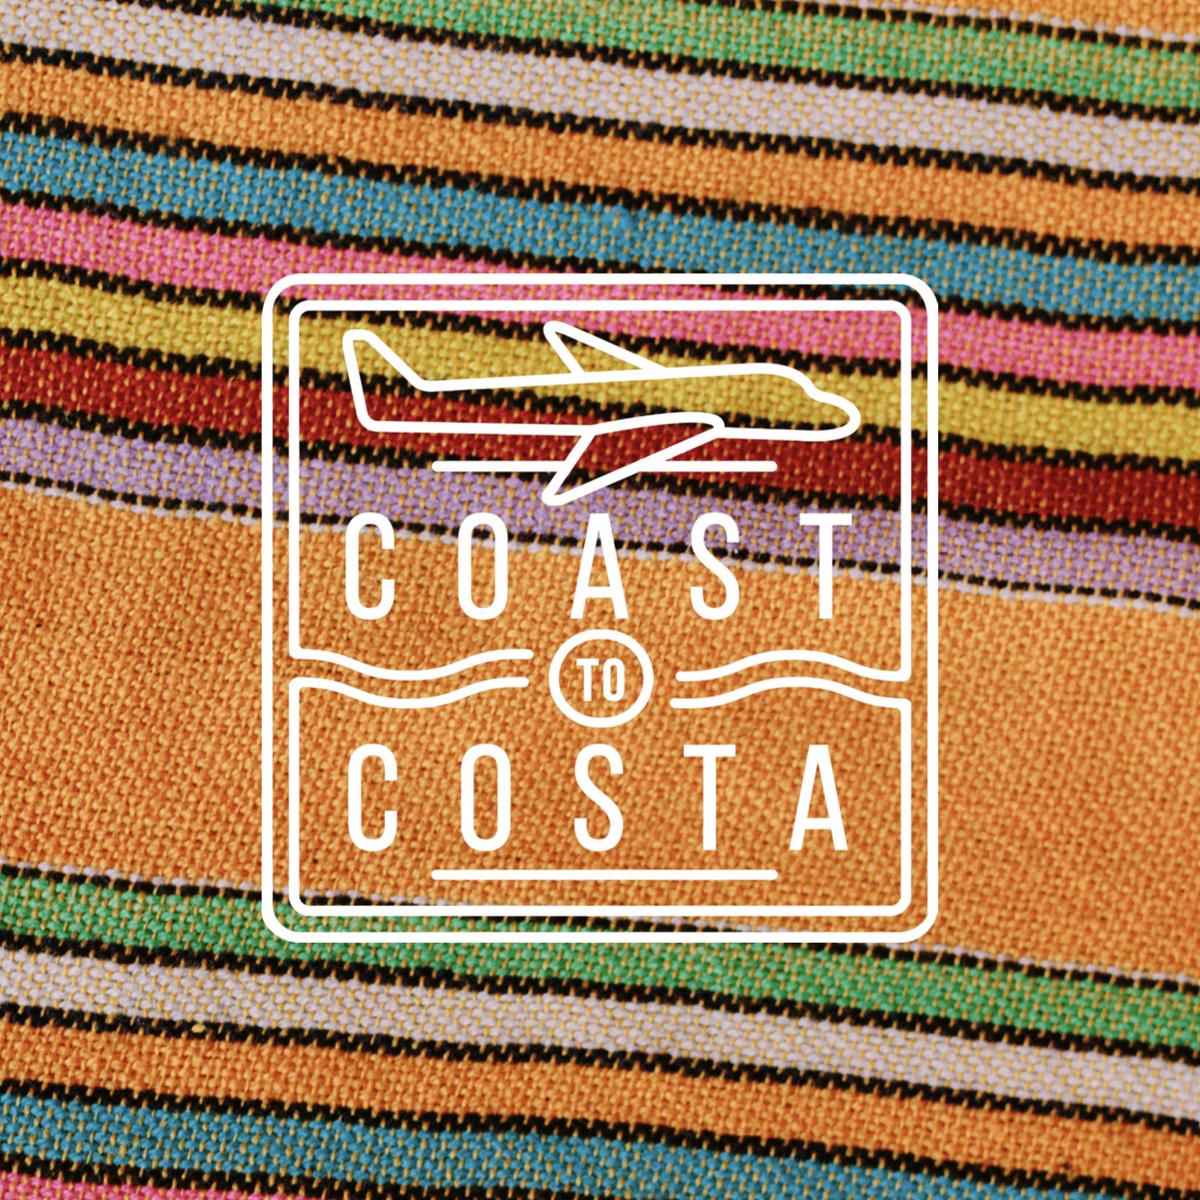 Coast To Costa's images